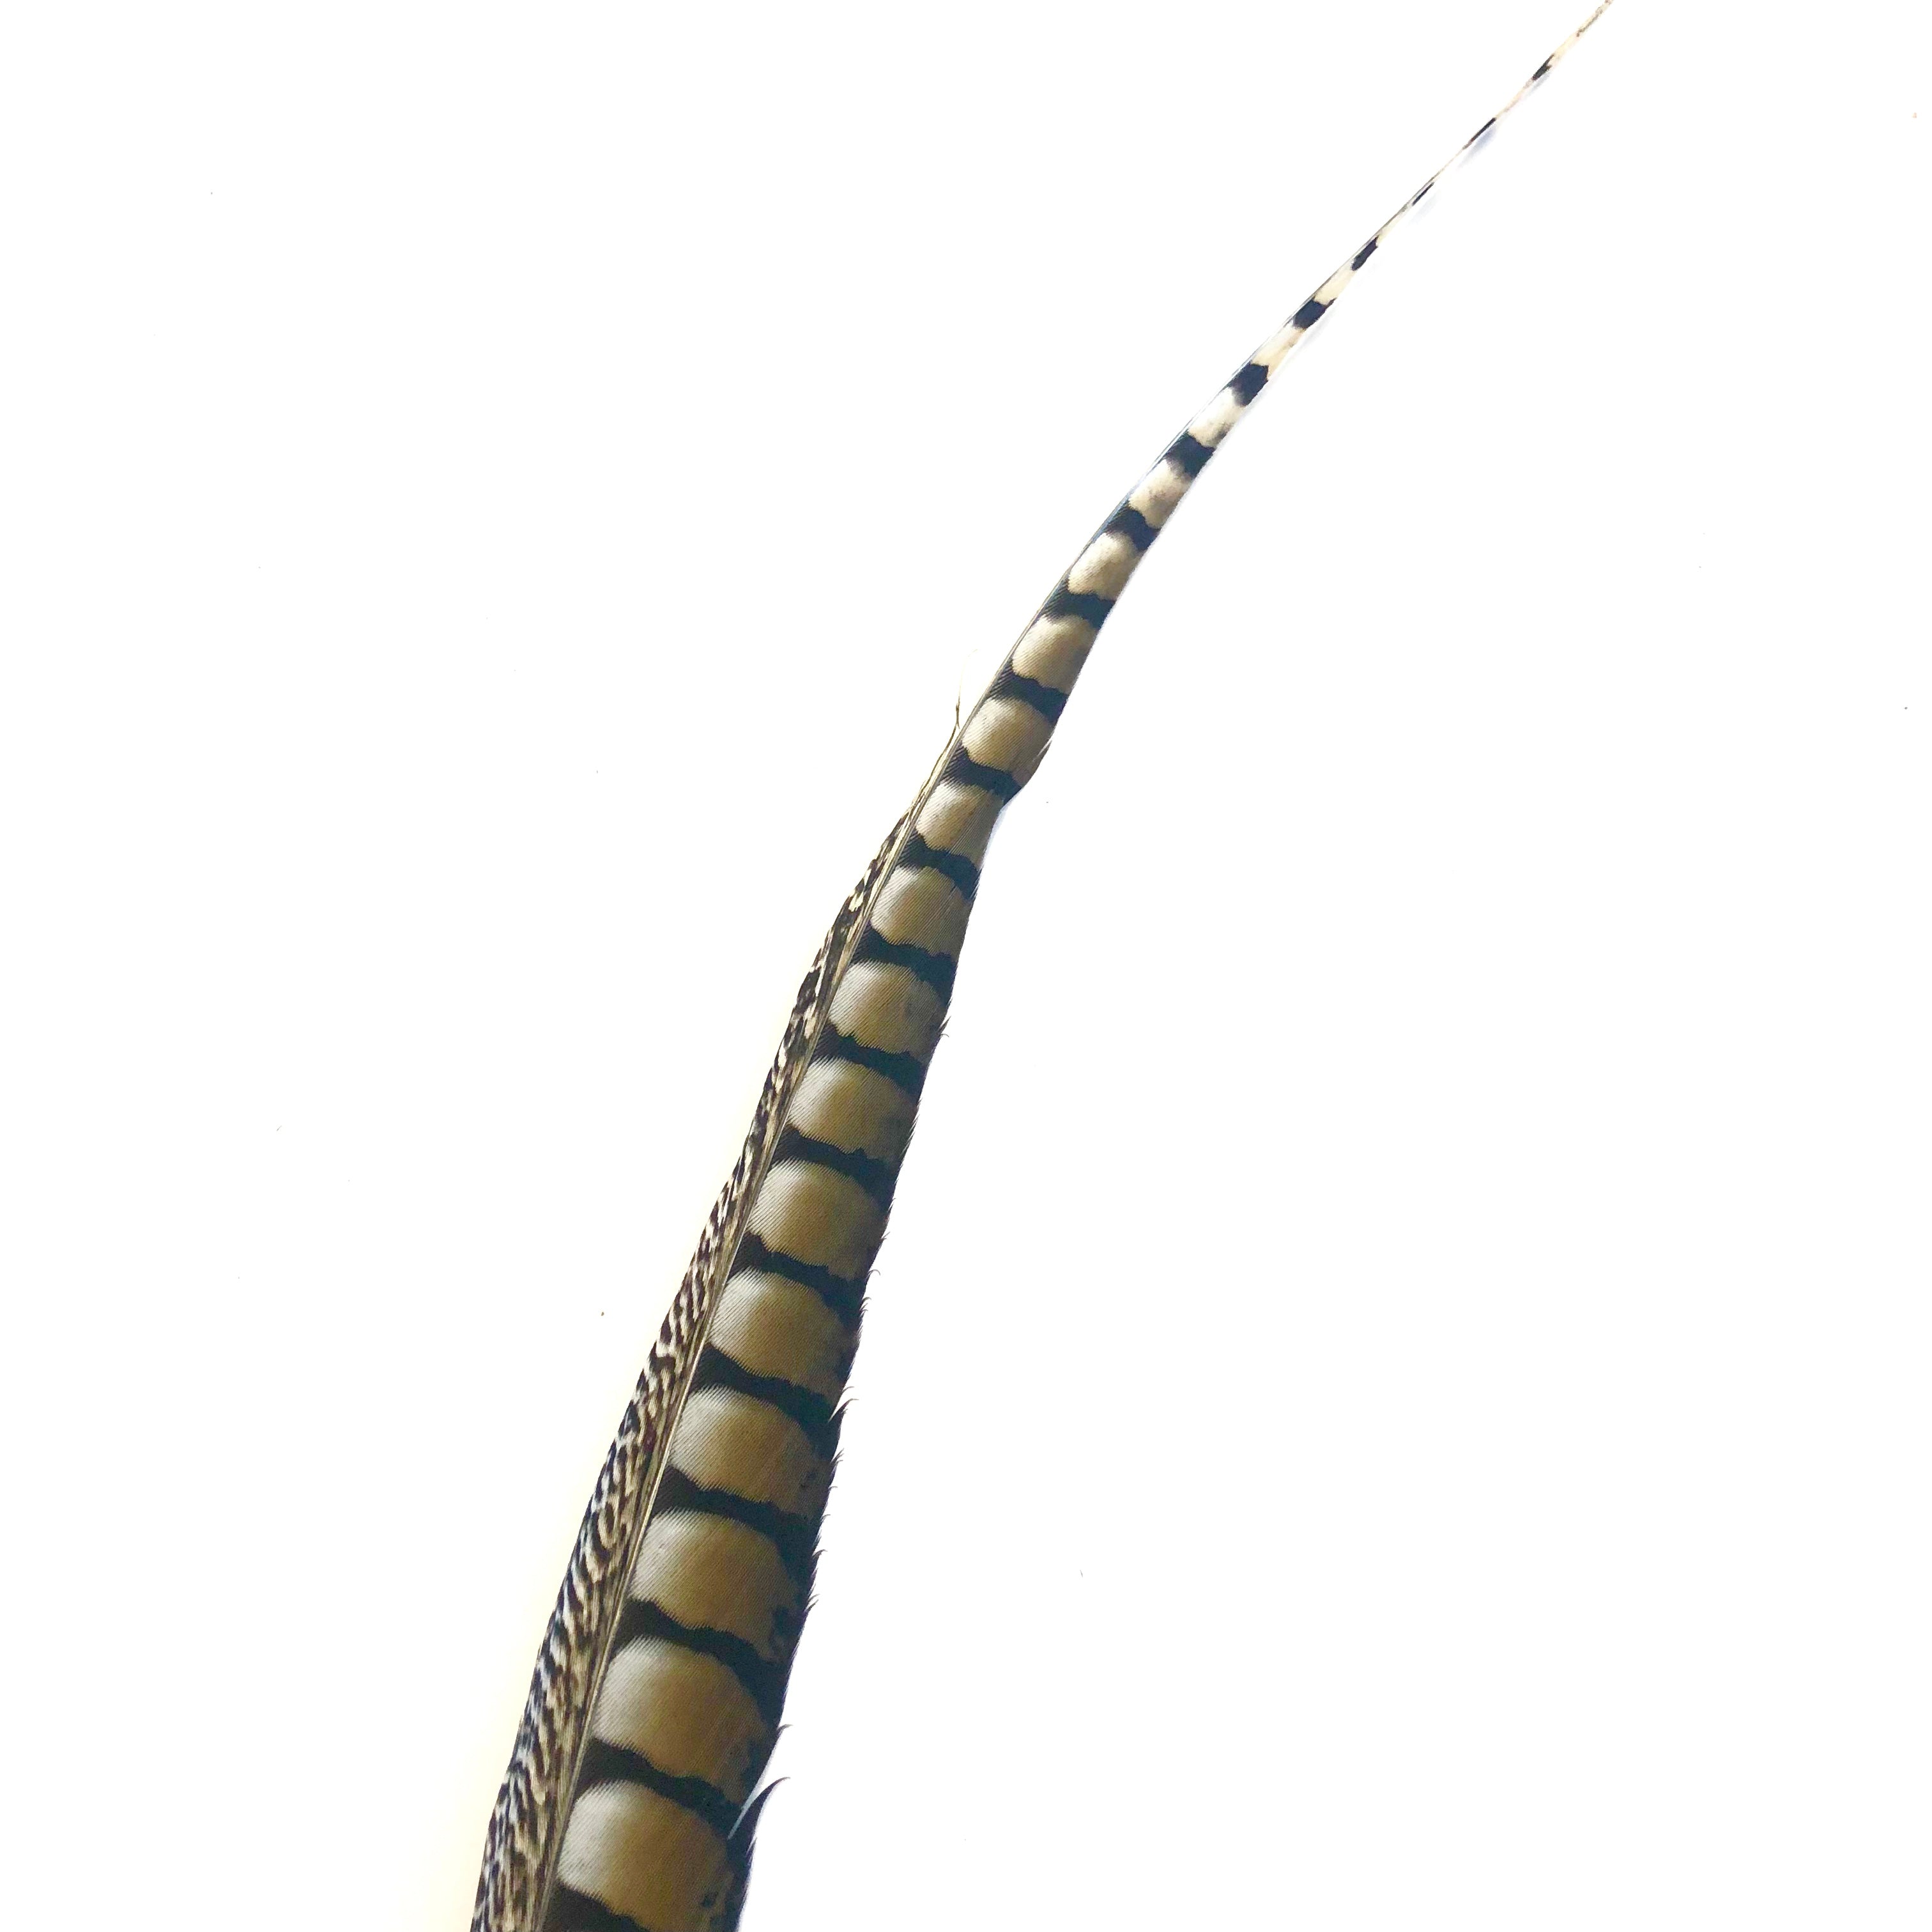 30" to 38" Lady Amherst Pheasant Side Tail Feather - Natural